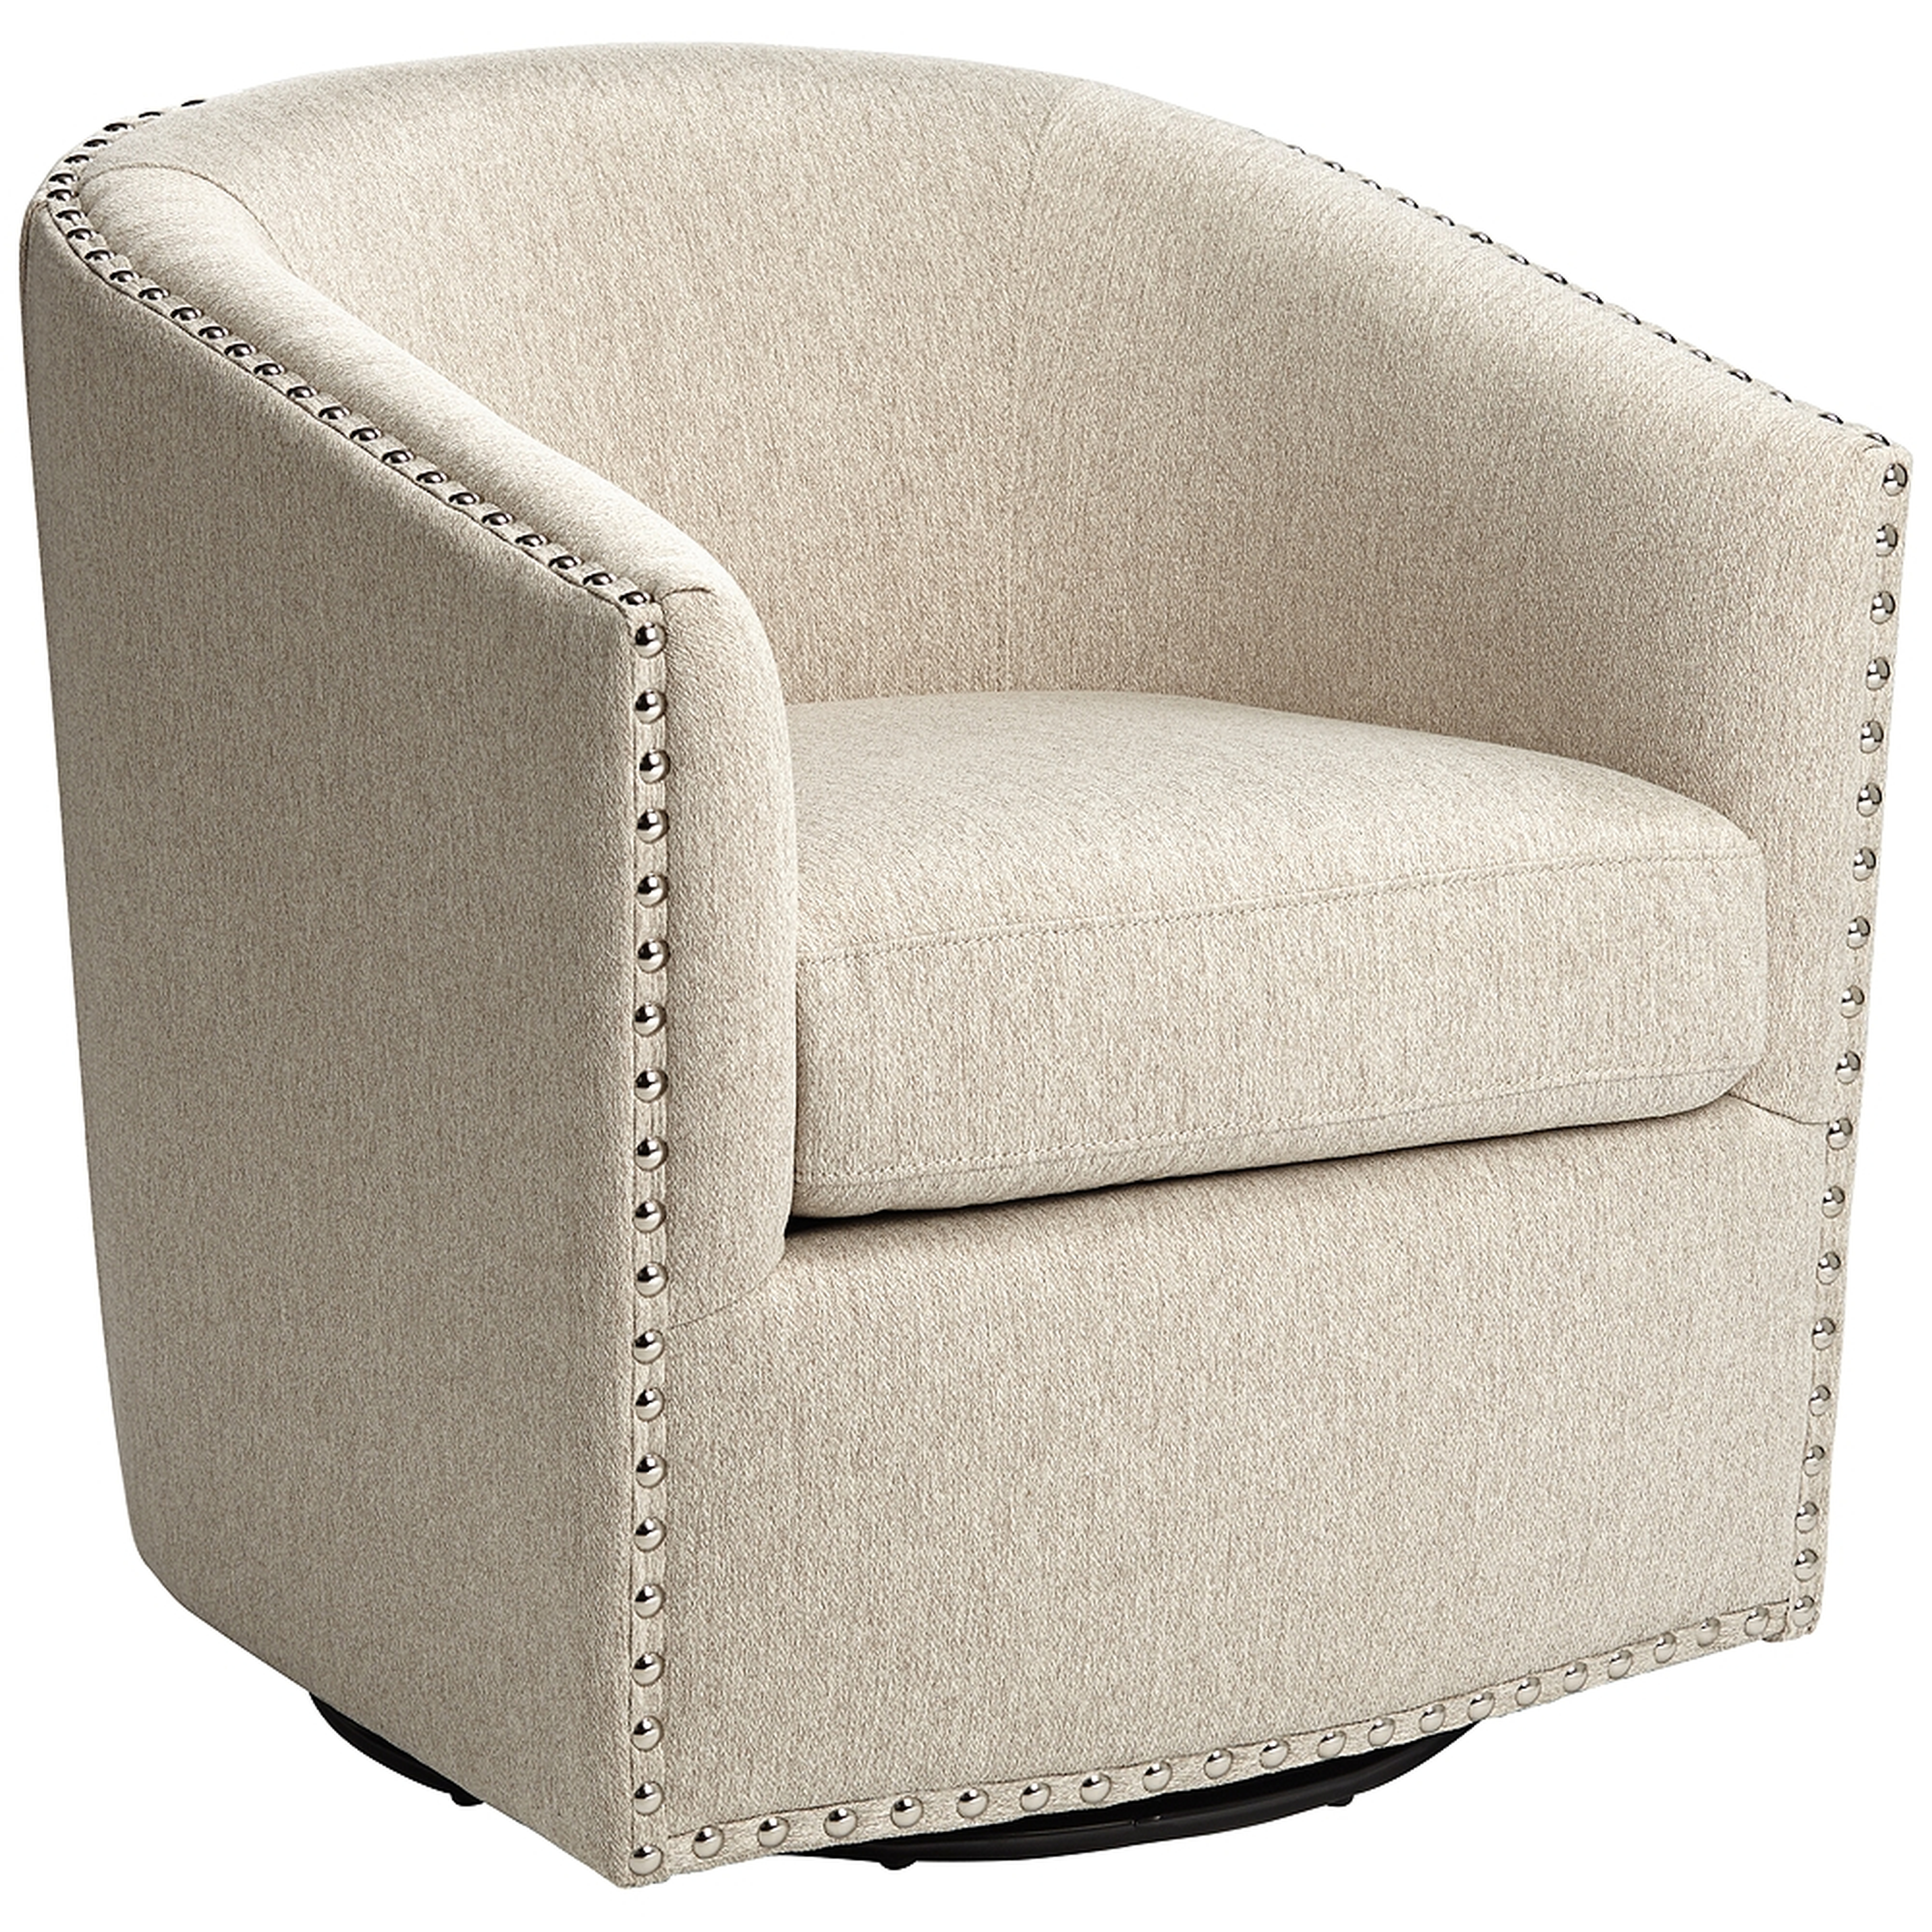 Fullerton II Oatmeal Swivel Accent Chair - Style # 79H34 - Lamps Plus